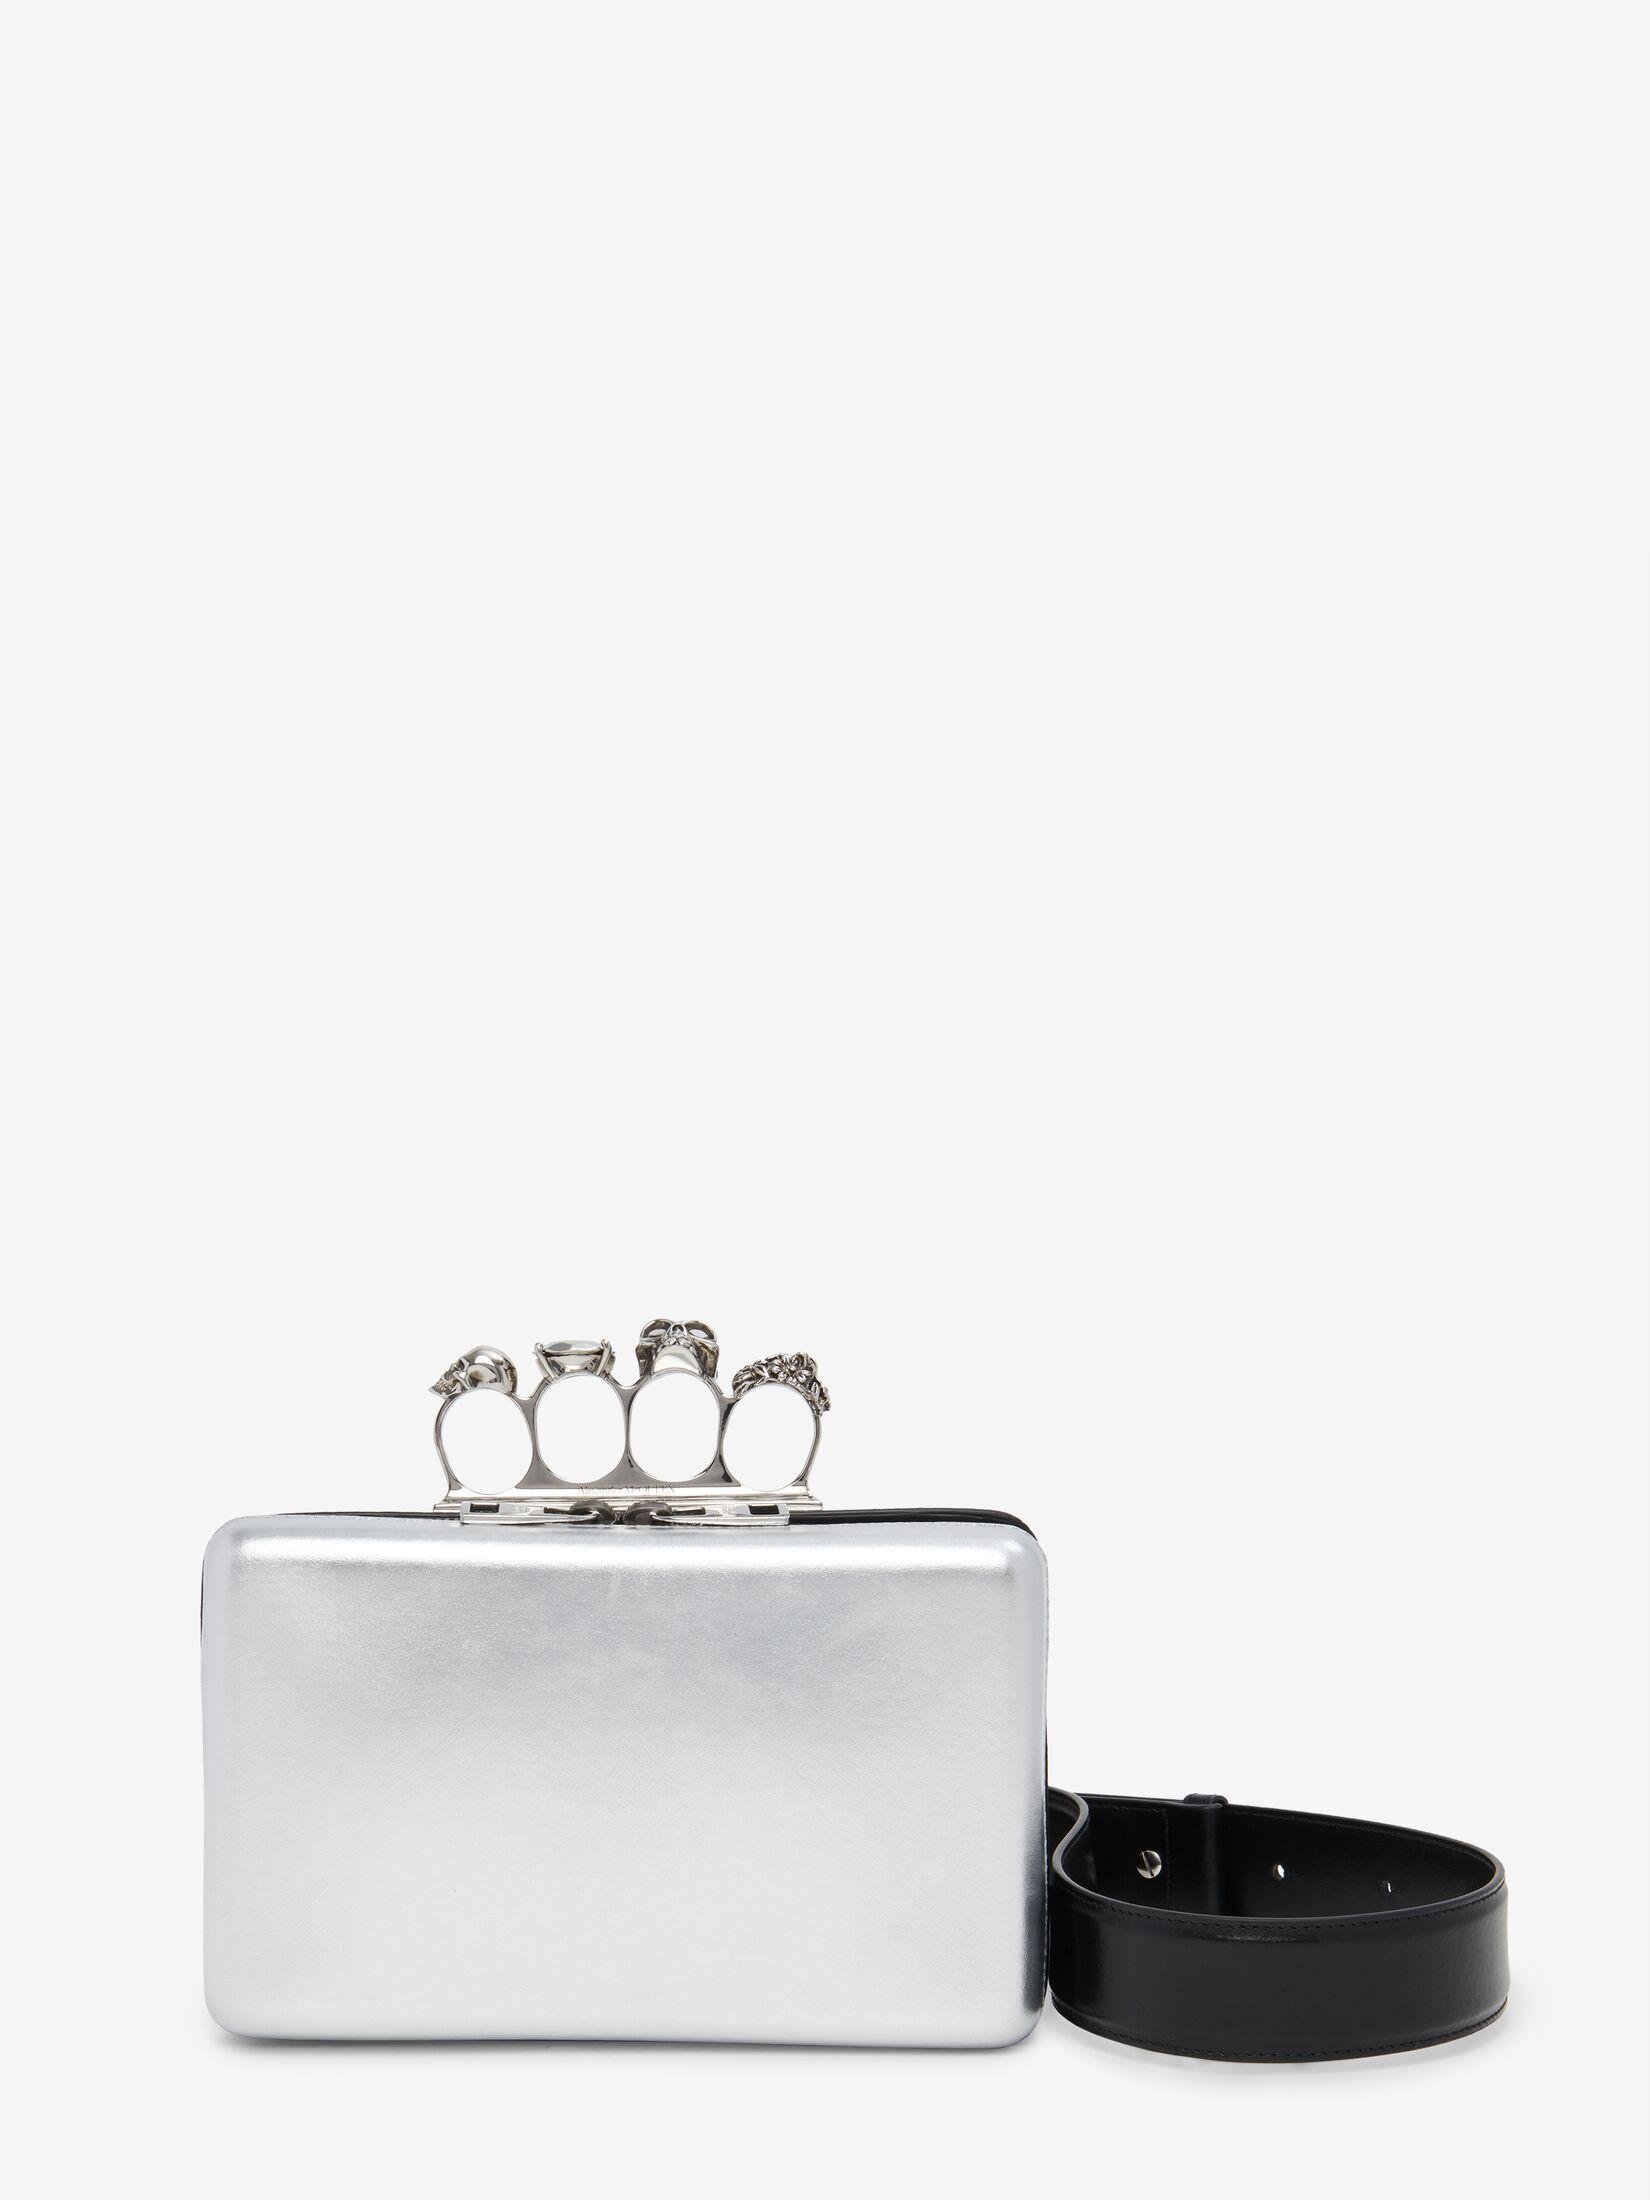 The Knuckle Twisted Clutch by ALEXANDER MCQUEEN